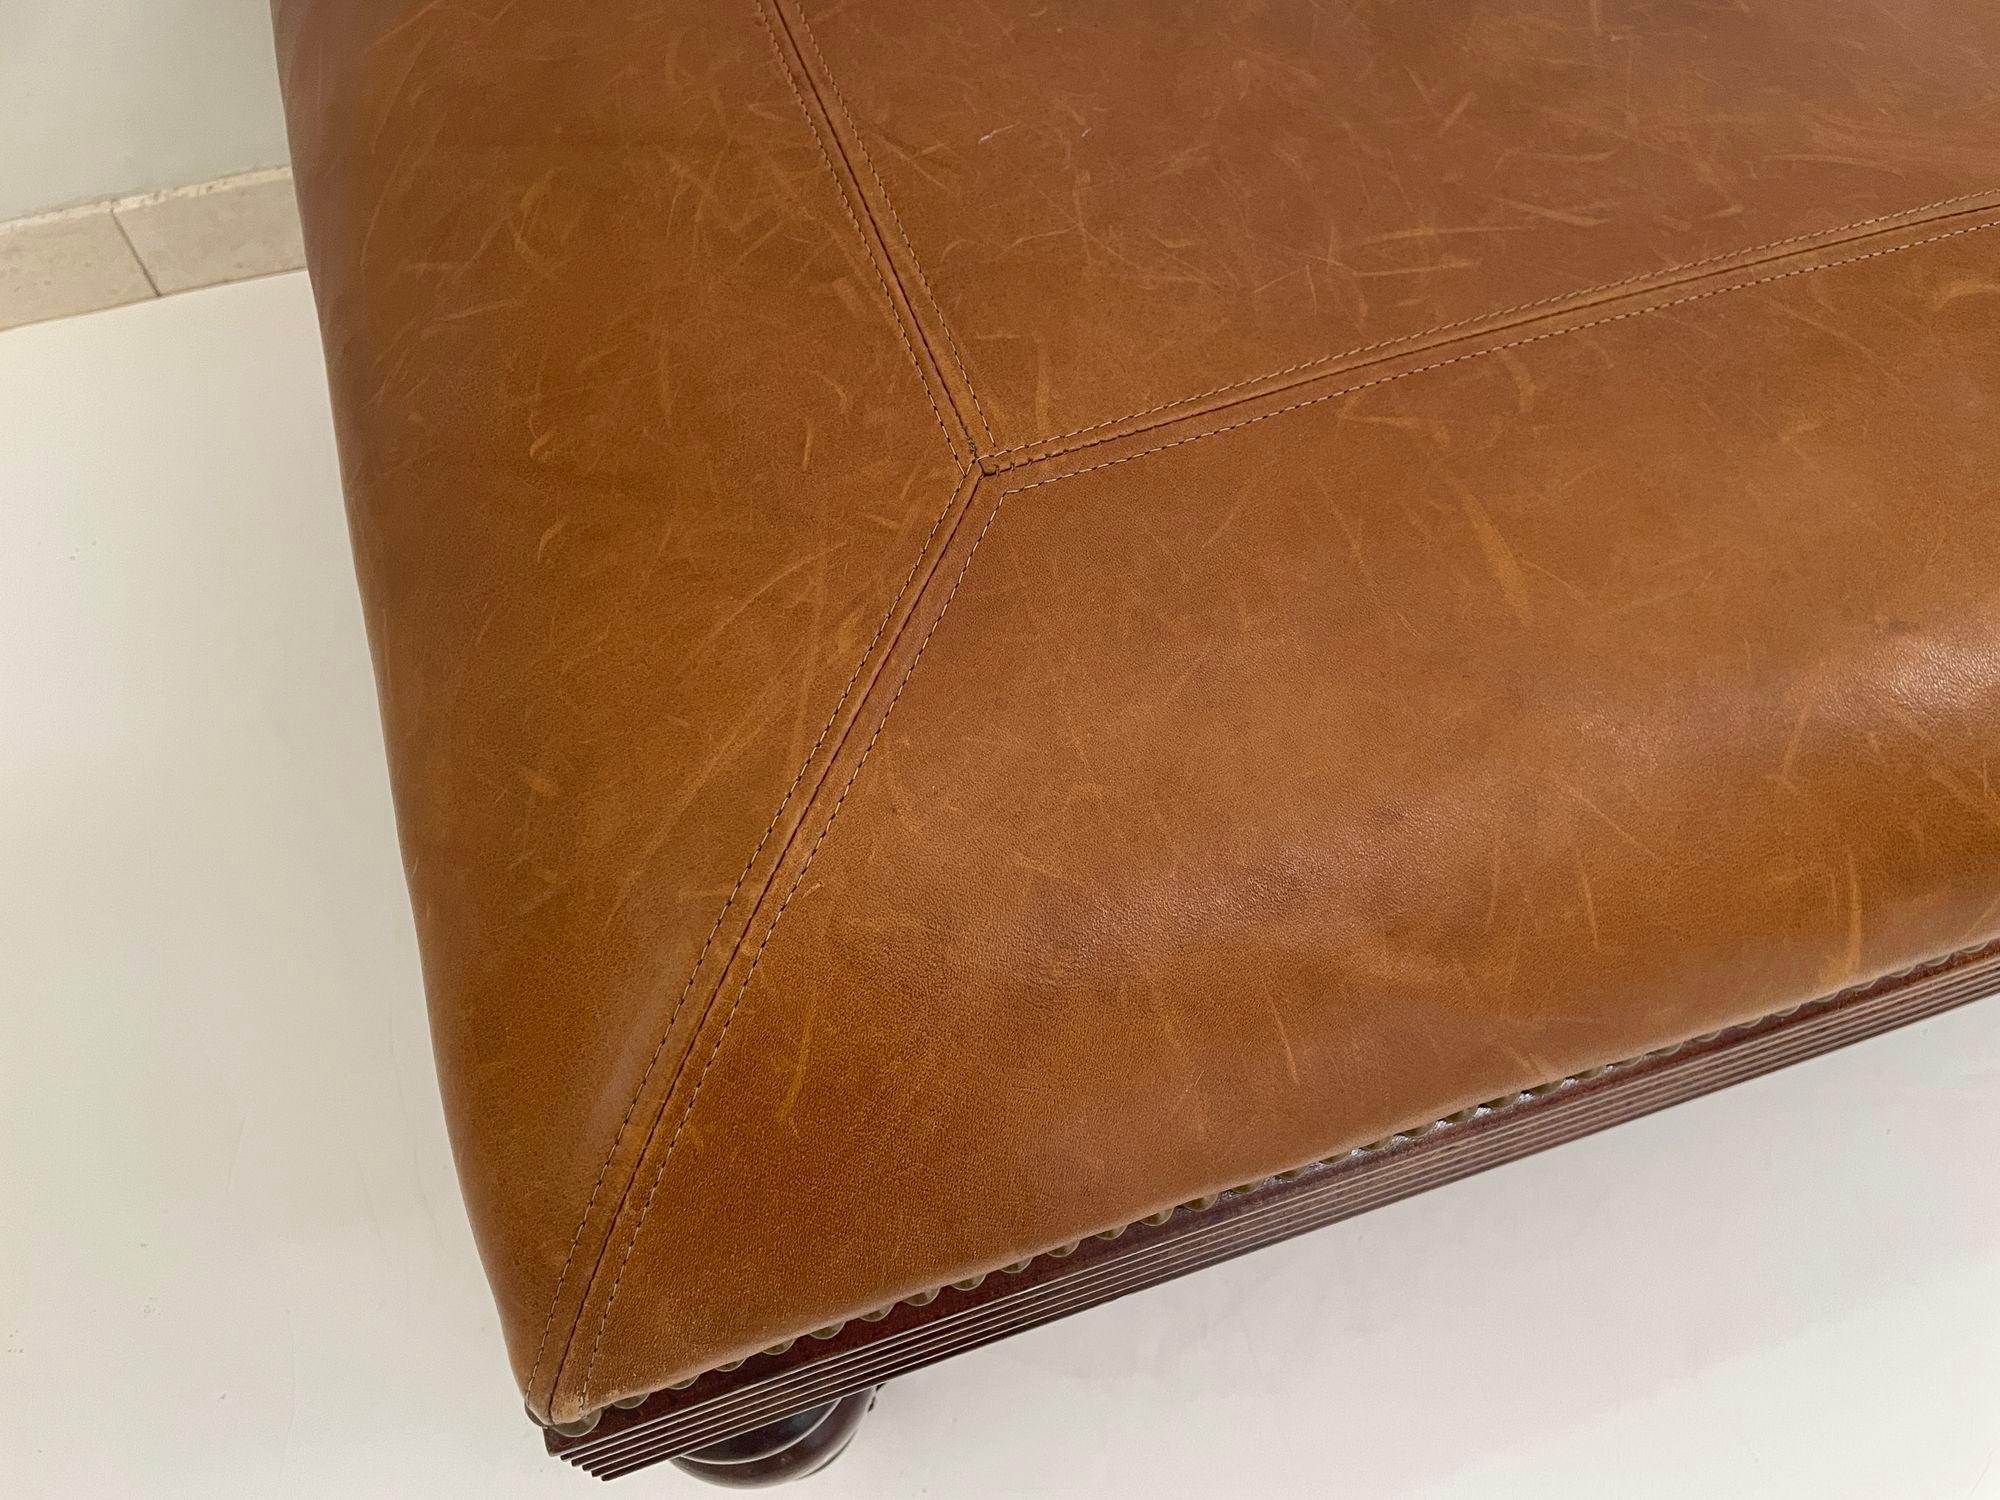 Victorian English Style leather Ottoman with Brass Casters and Nailhead Trim In Good Condition For Sale In North Hollywood, CA